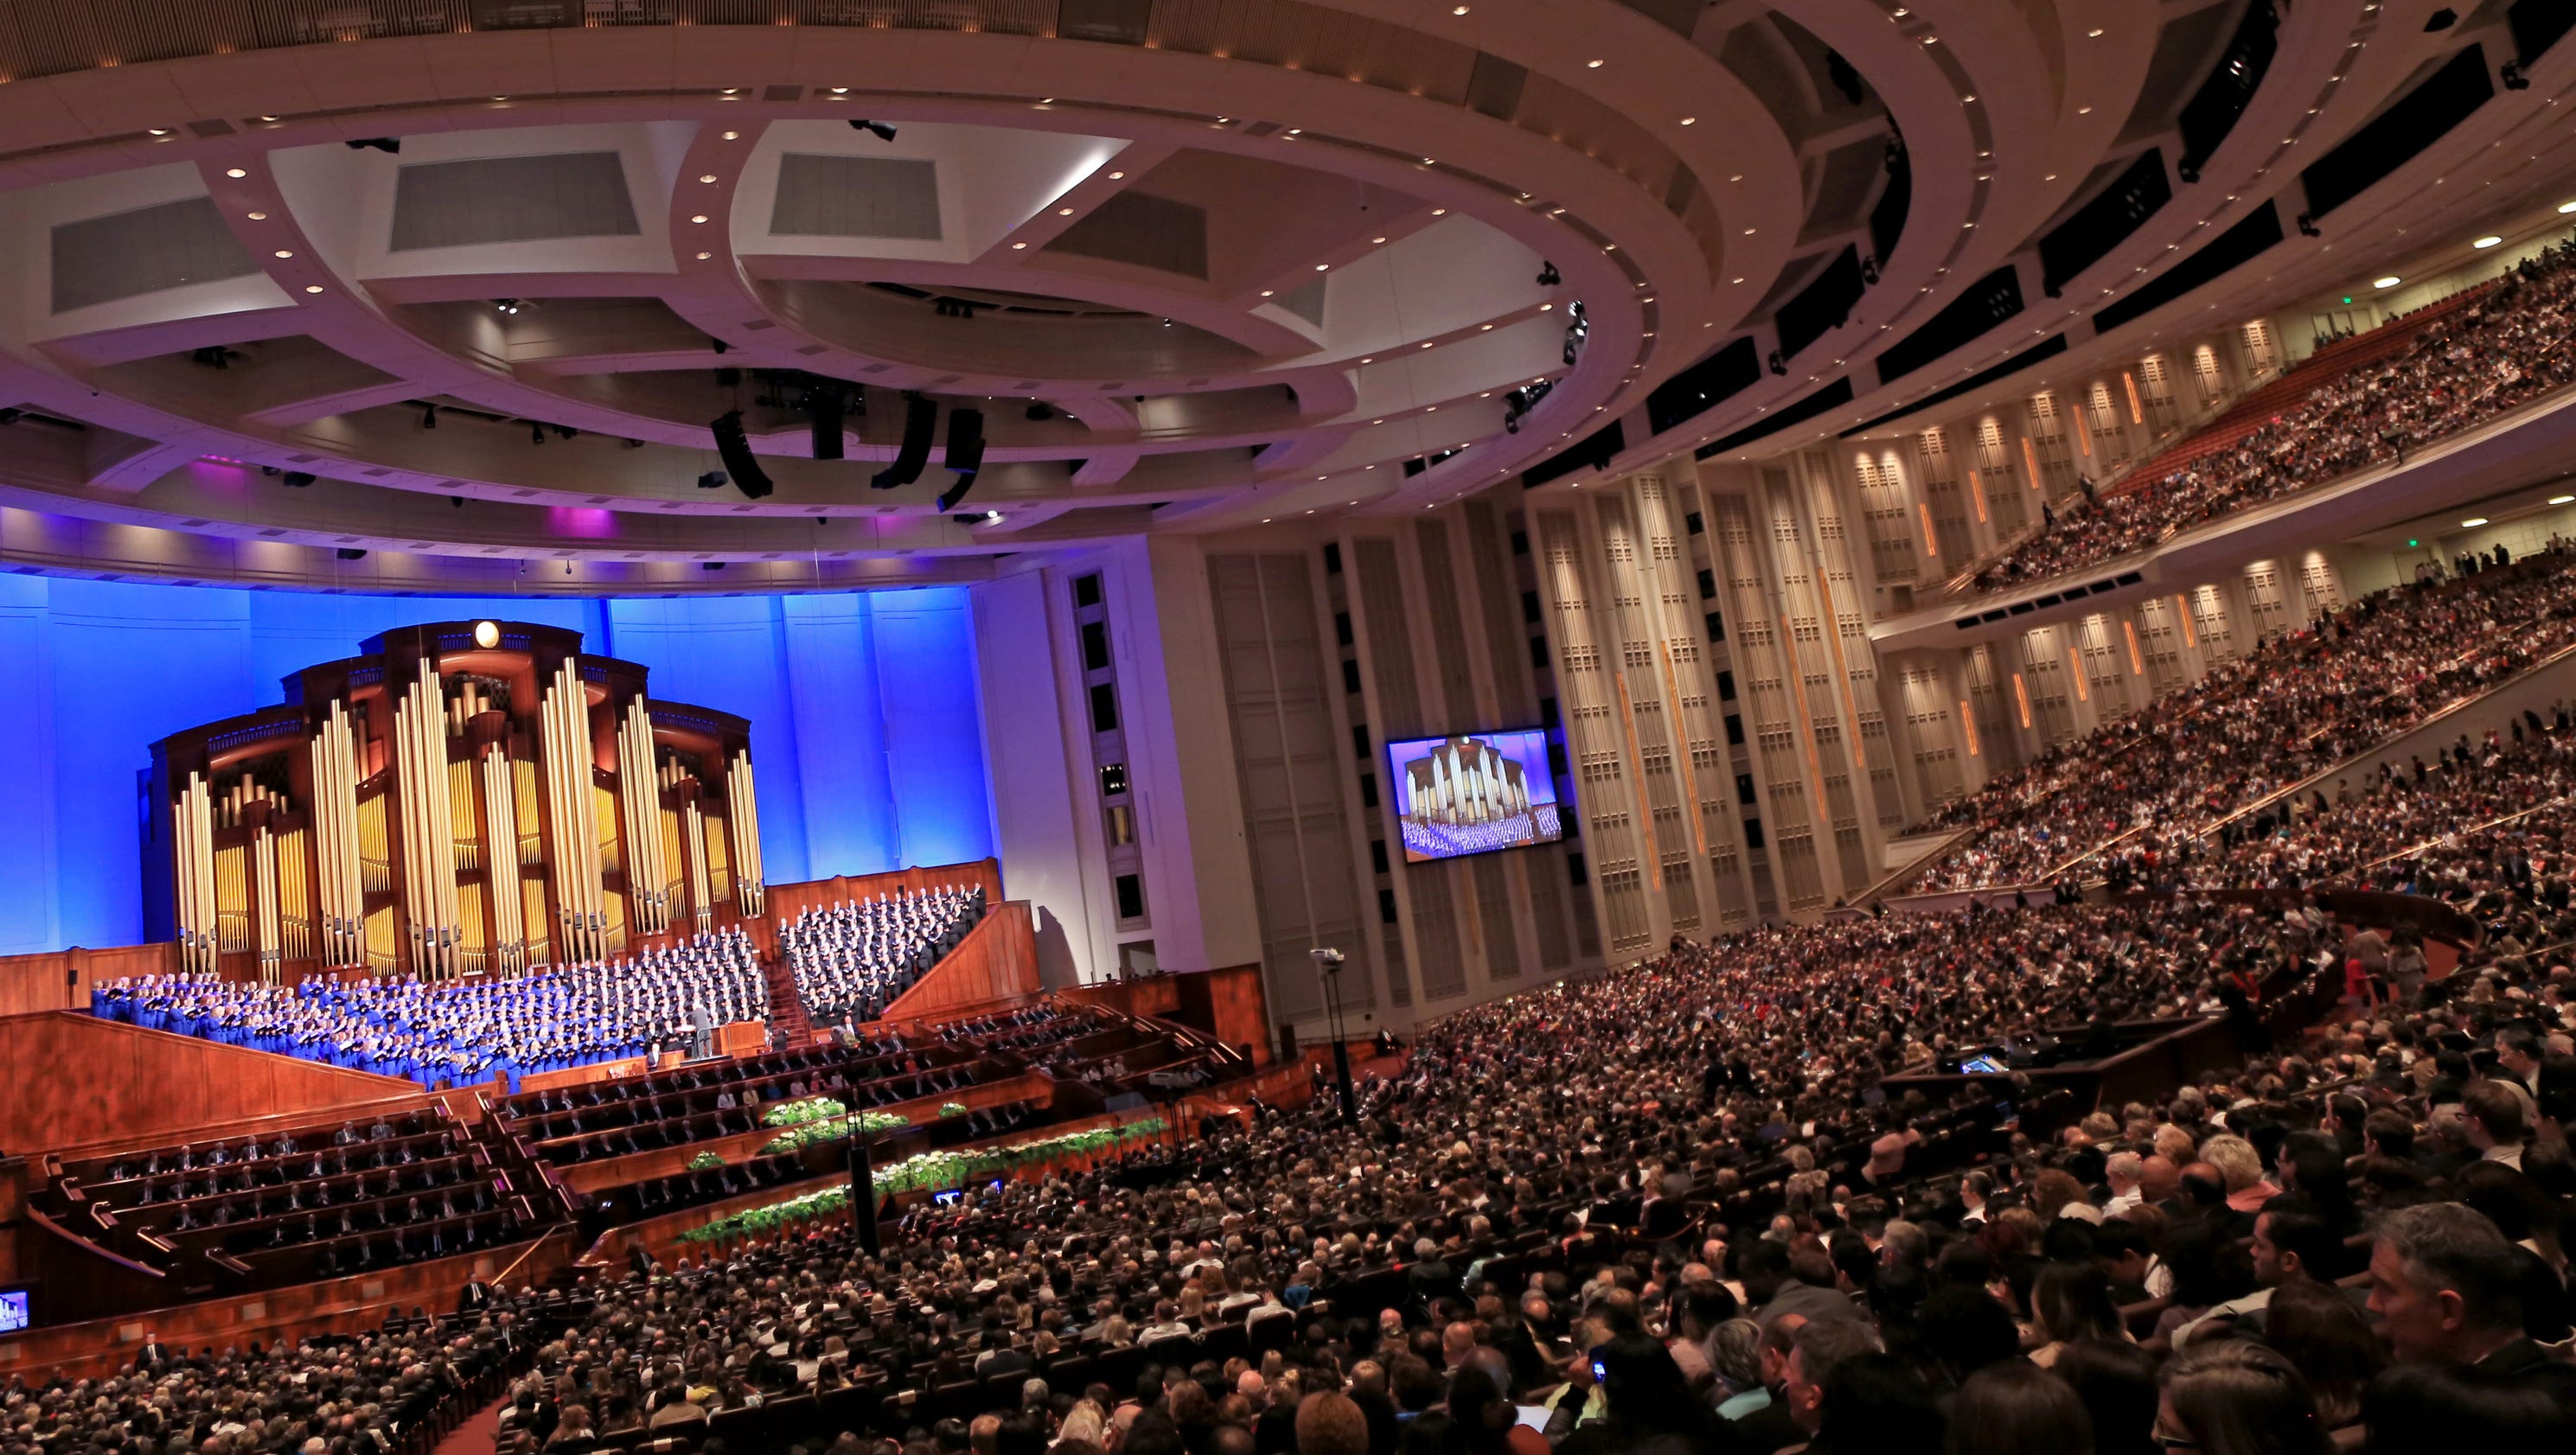 Excerpts from LDS General Conference Sunday